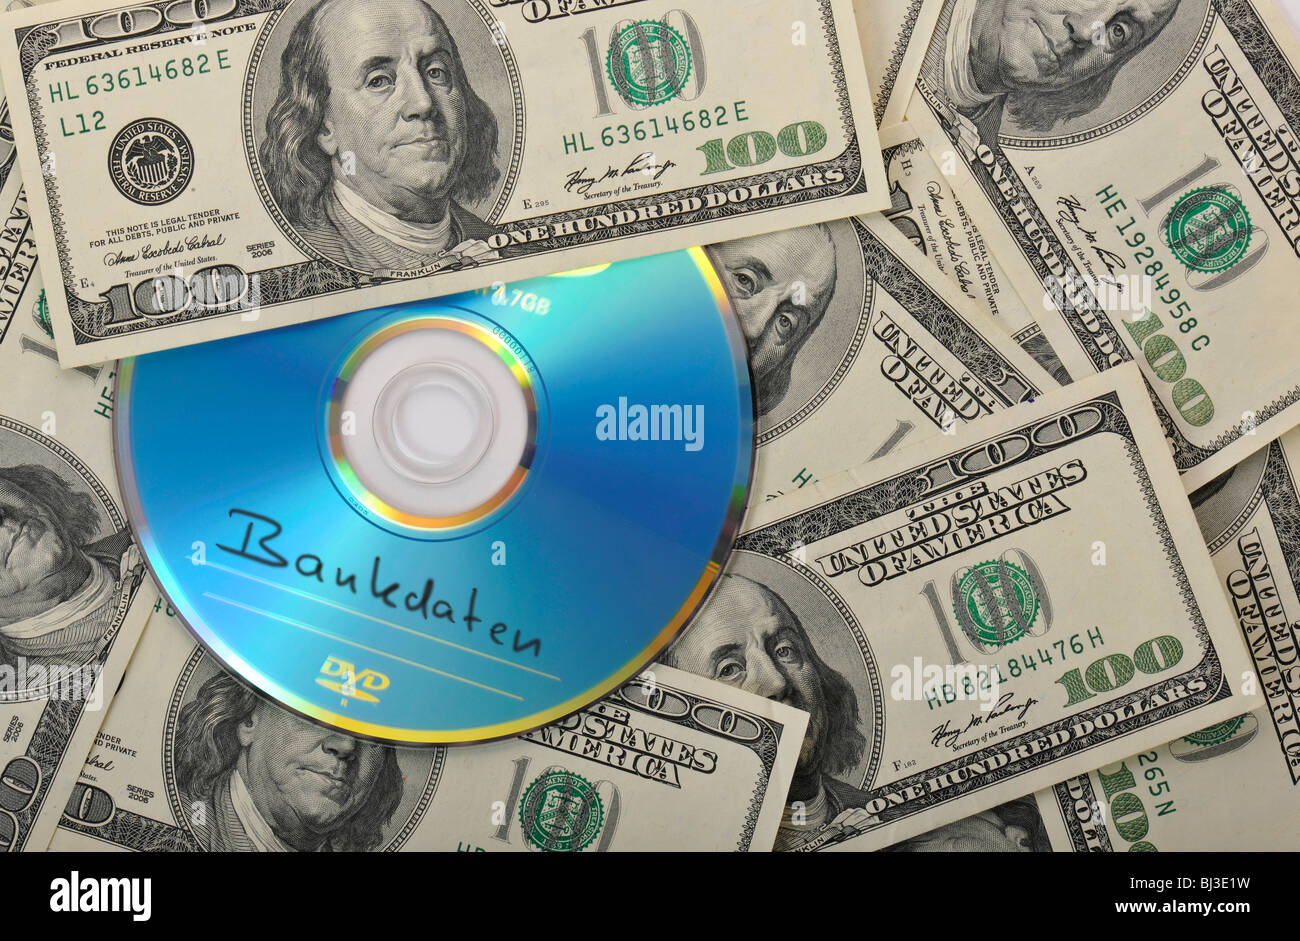 DVD, CD, 100-dollar bills, symbolic image for the purchase of bank records, tax evasion, privacy Stock Photo